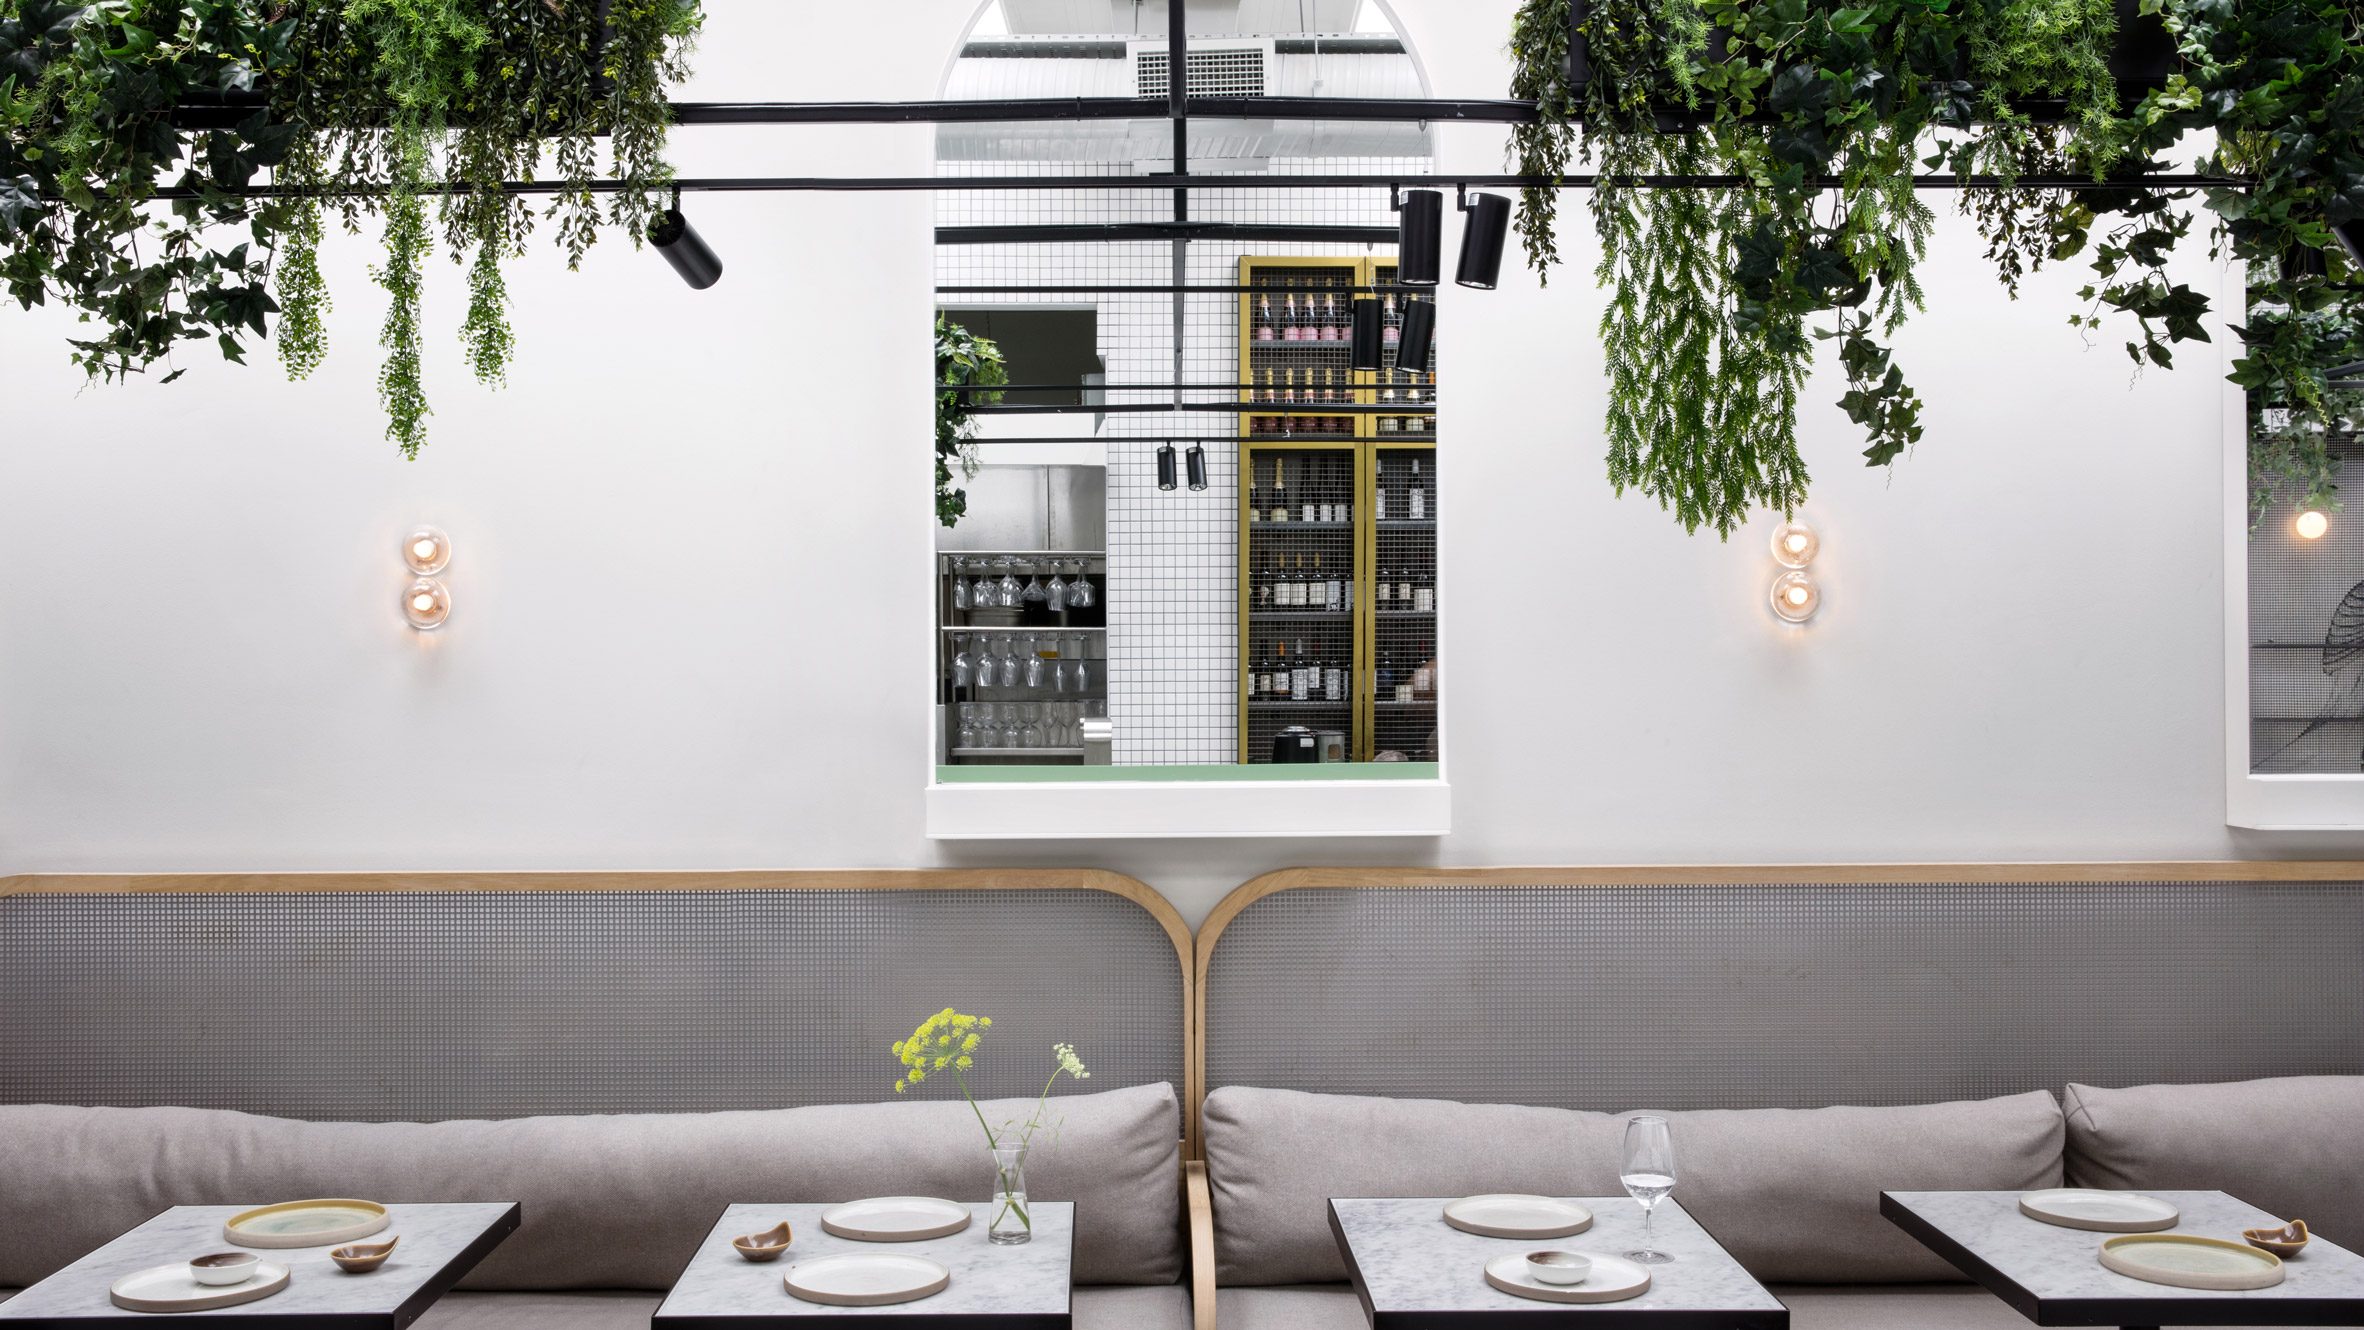 Stella Collective "brings the outside in" for seaside cafe interior-0